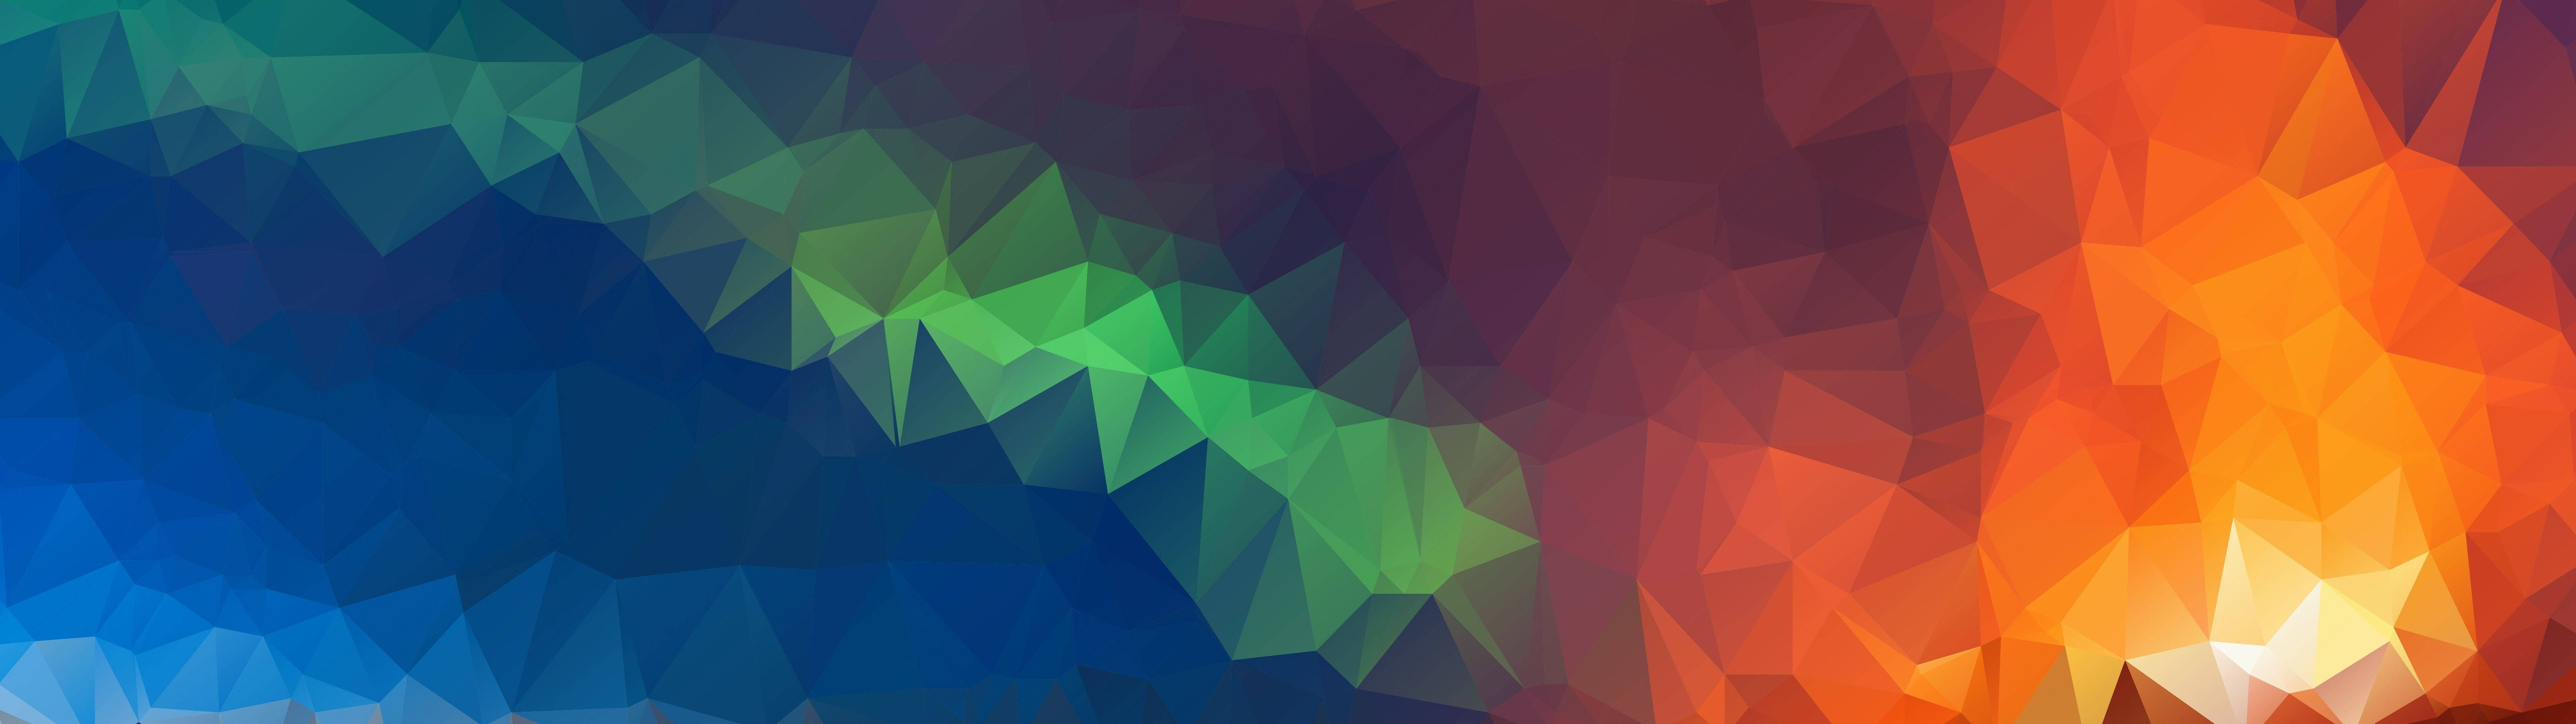 7680X2160 Abstract Wallpaper and Background